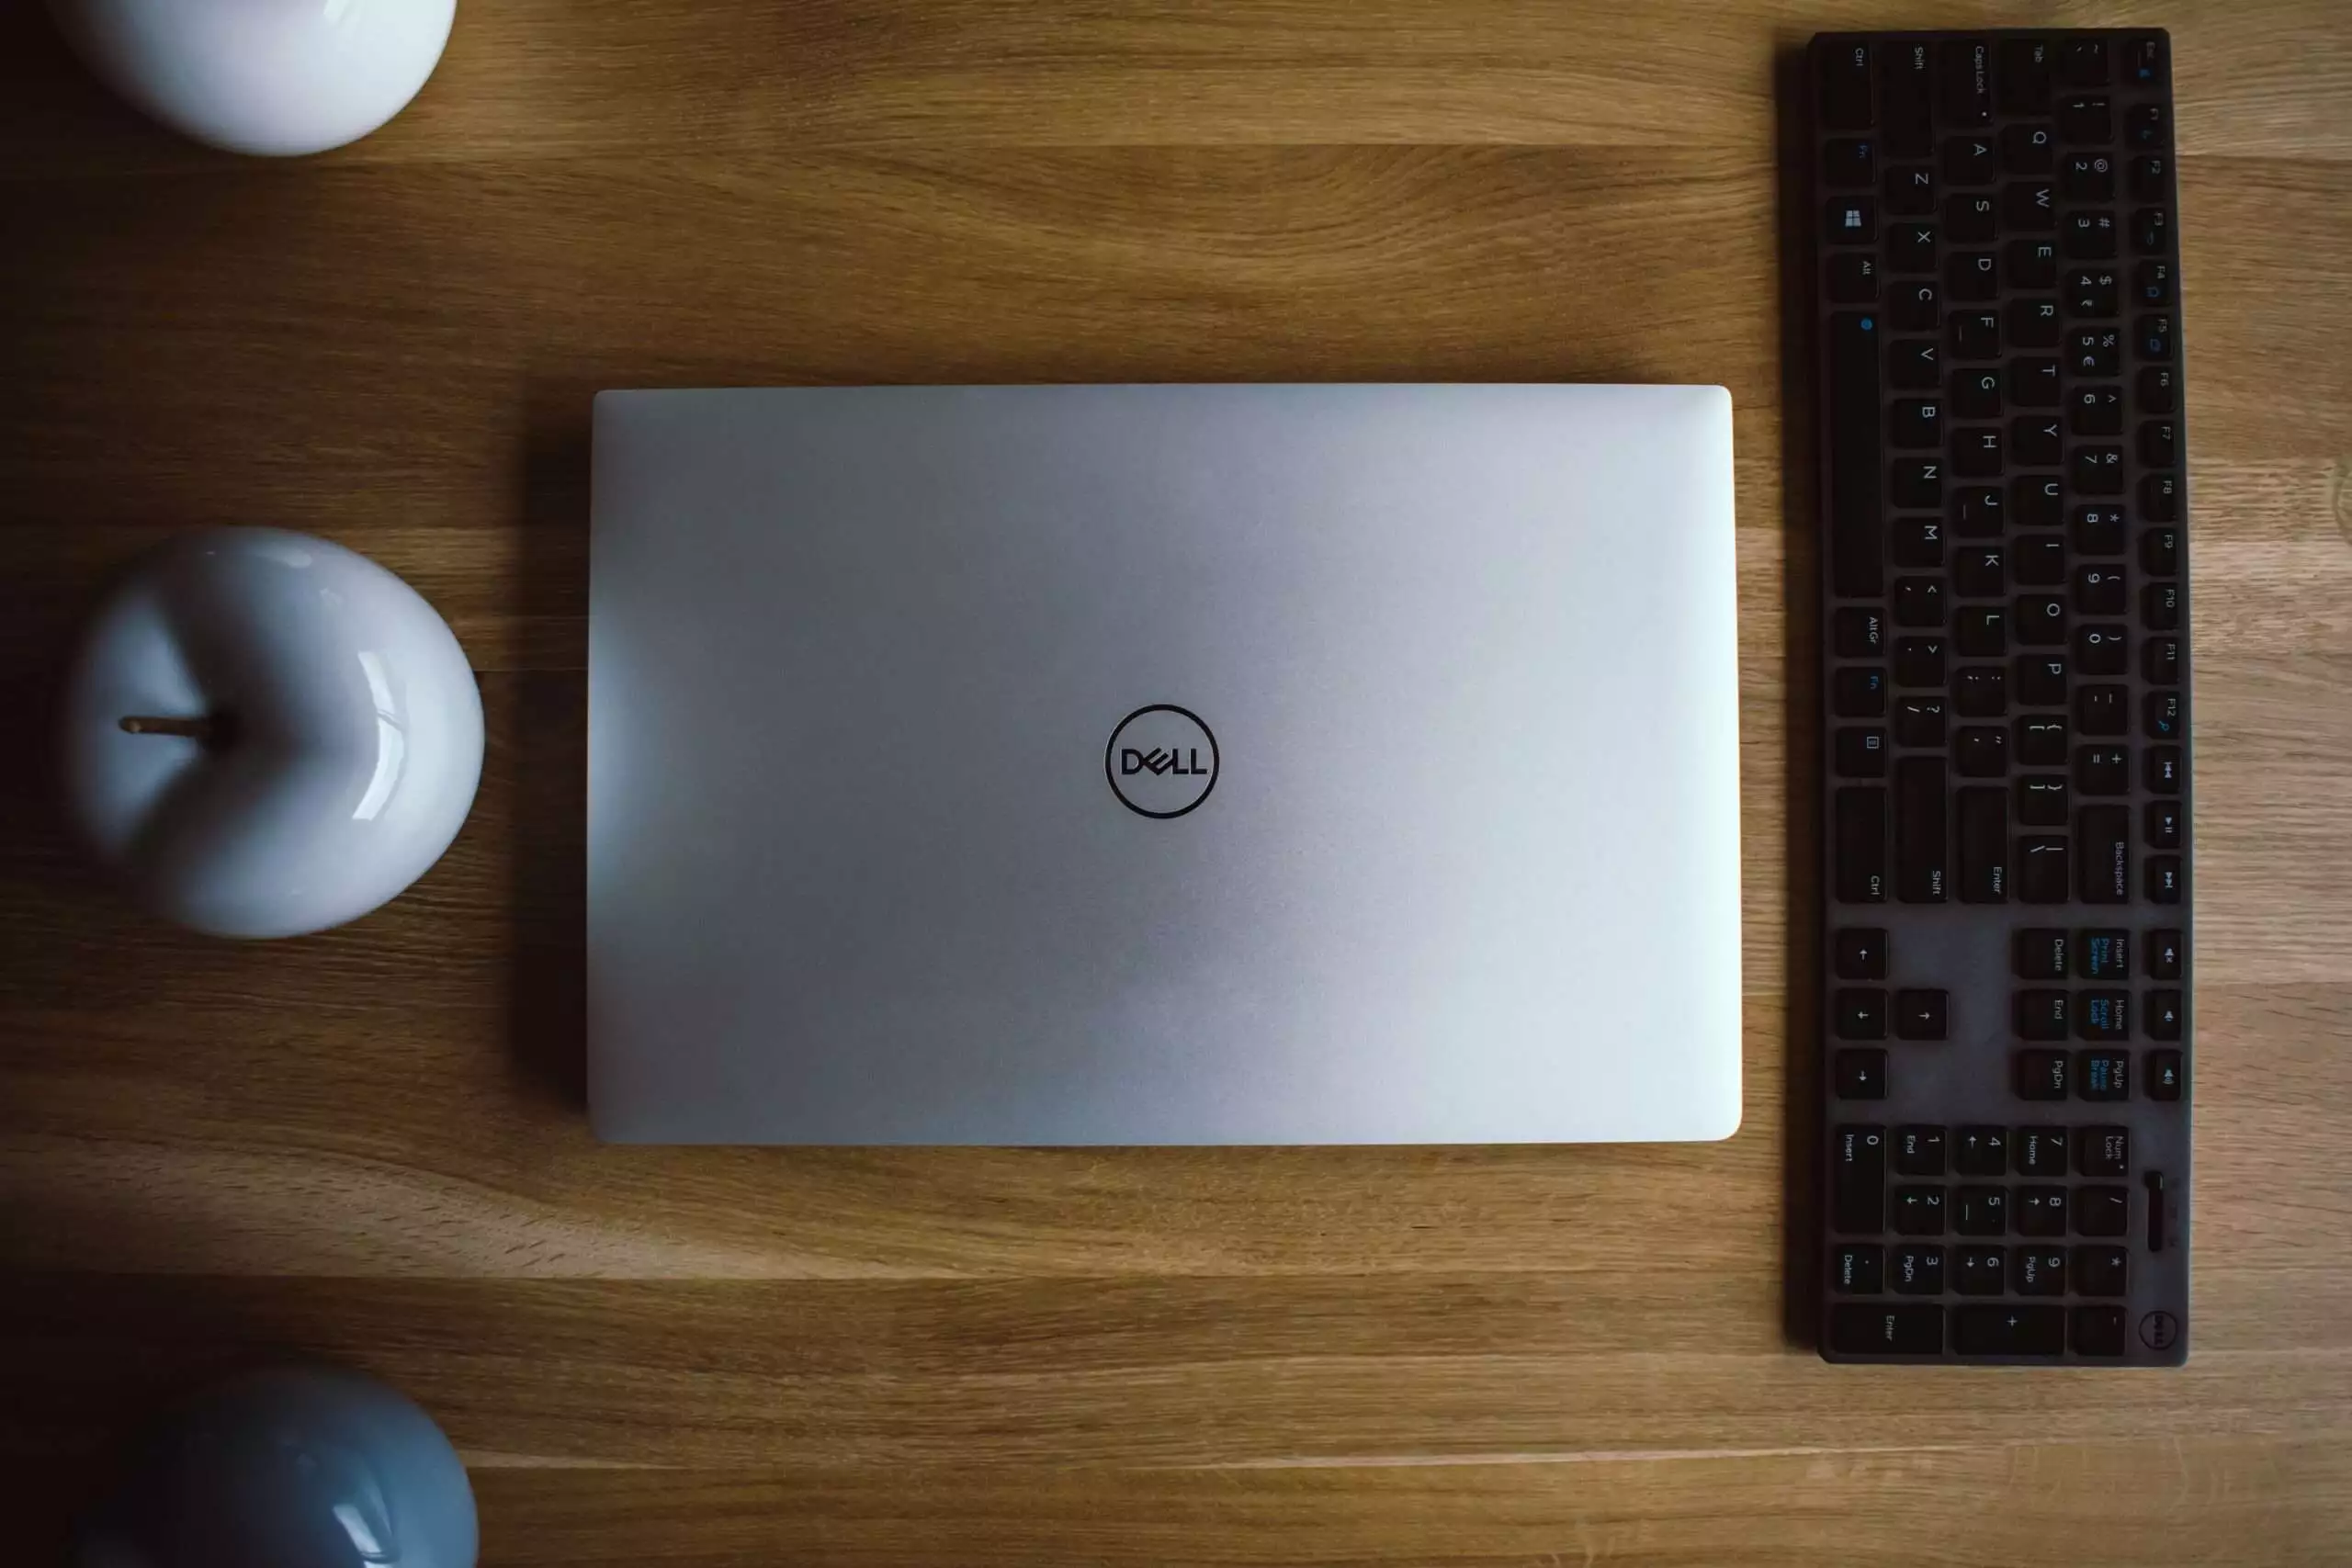 How To Factory Reset Dell Laptop